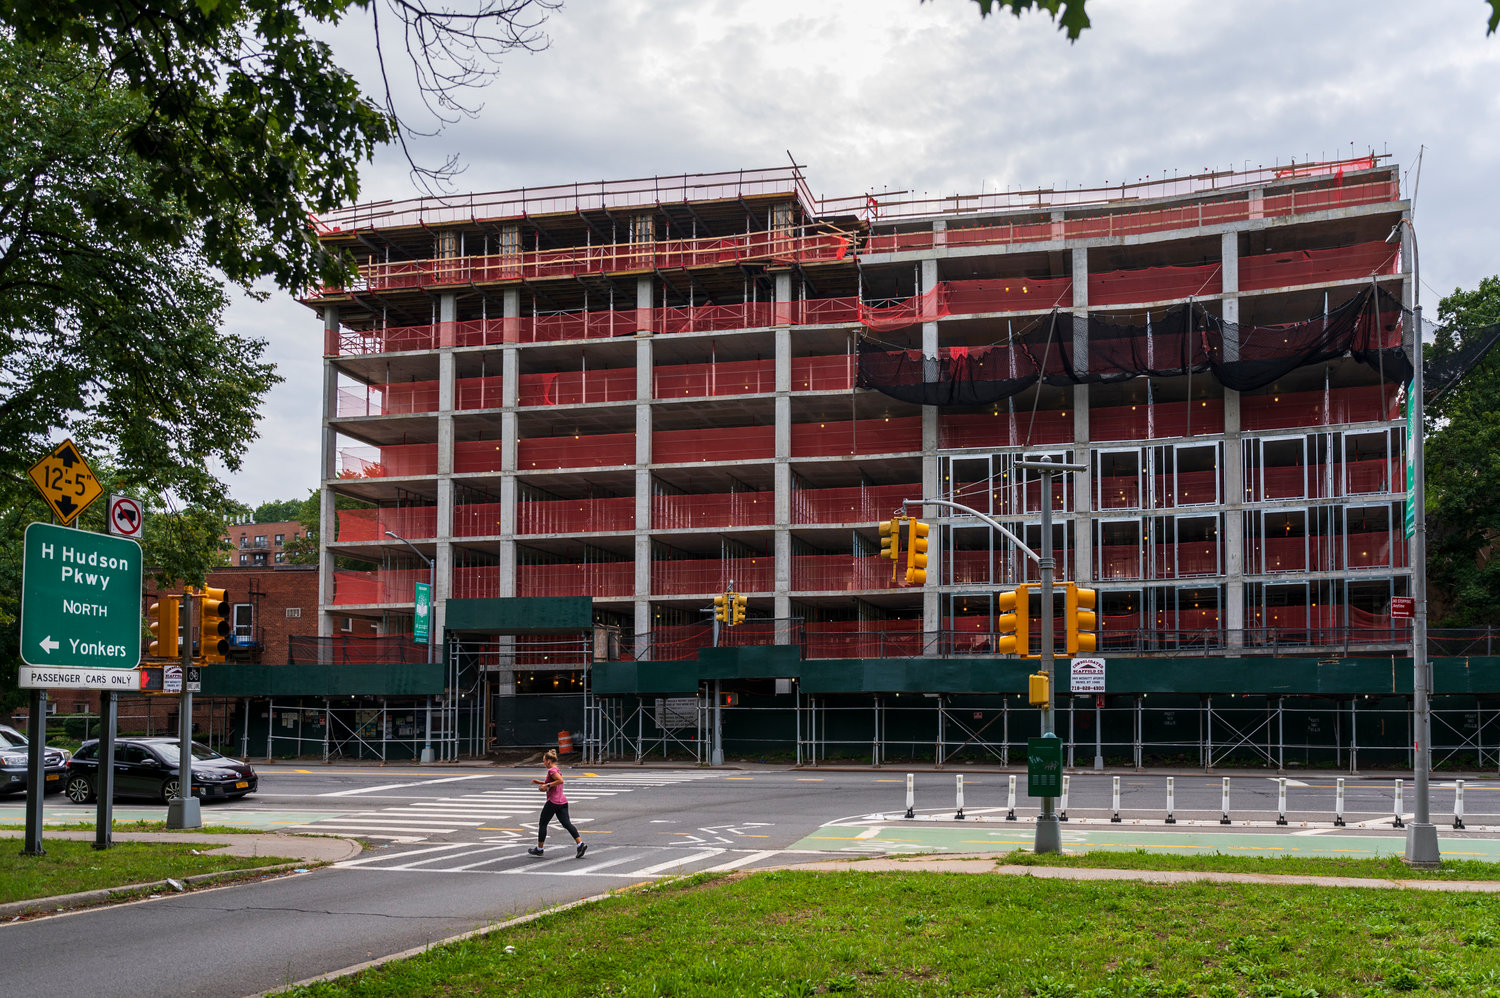 The seven-story building at what was once known as 5278 Post Road has gone vertical rather quickly after weeks of hammering away at a massive mountain of rock originally found there. The project, now known as 6327 Broadway, is one of two within blocks of each other being developed by Stagg Group.